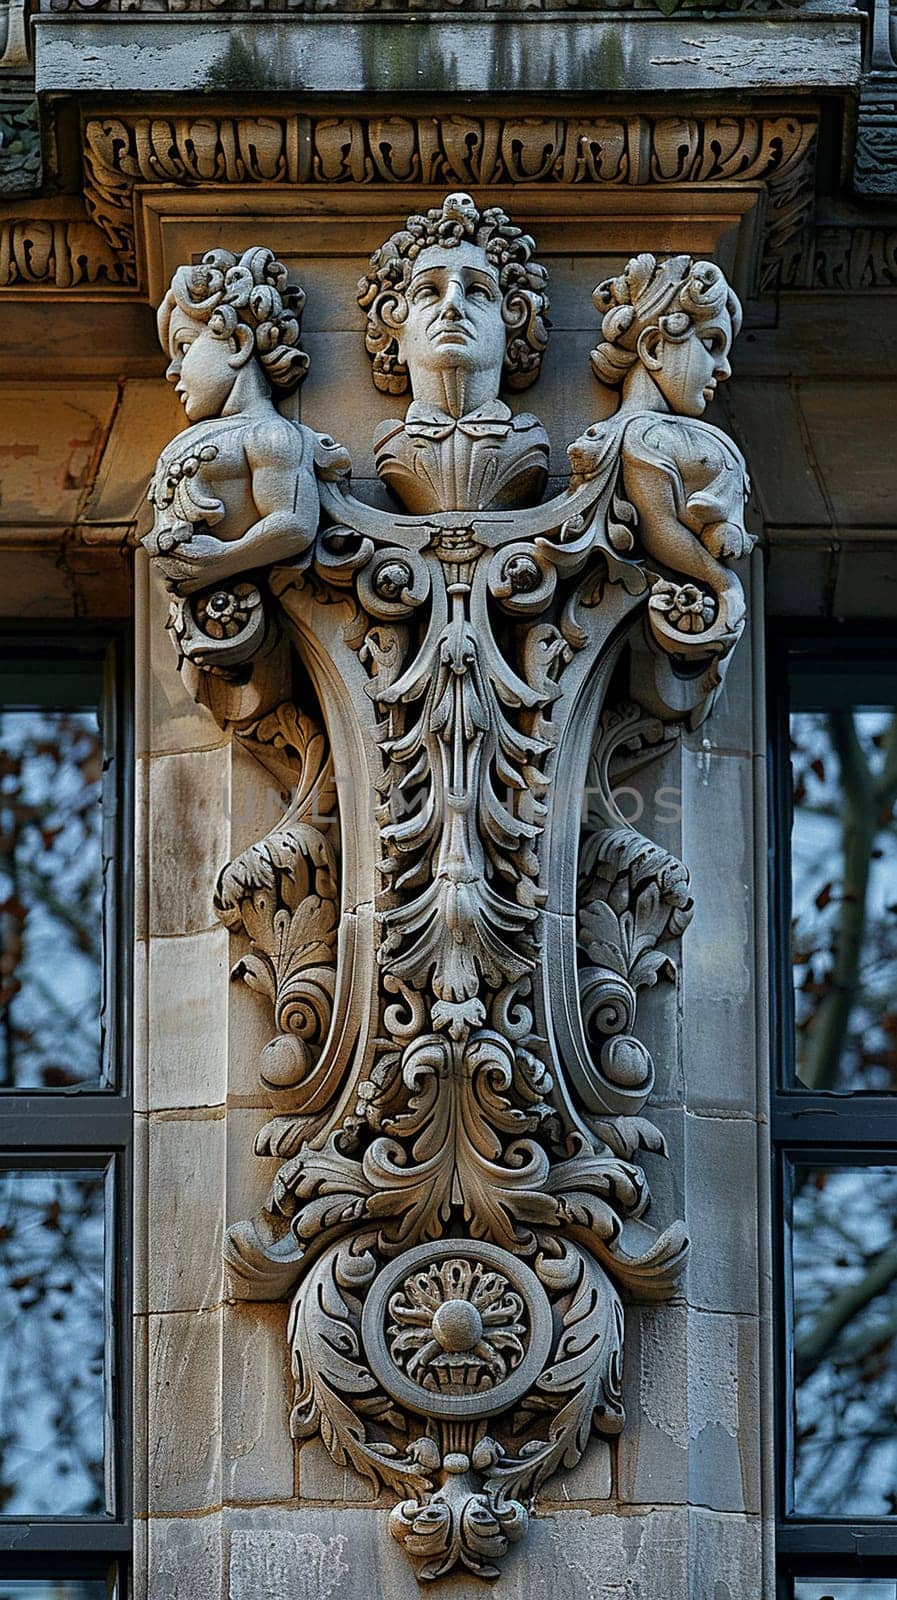 Close-up of intricate architectural details on a historic facade, showcasing craftsmanship and heritage.